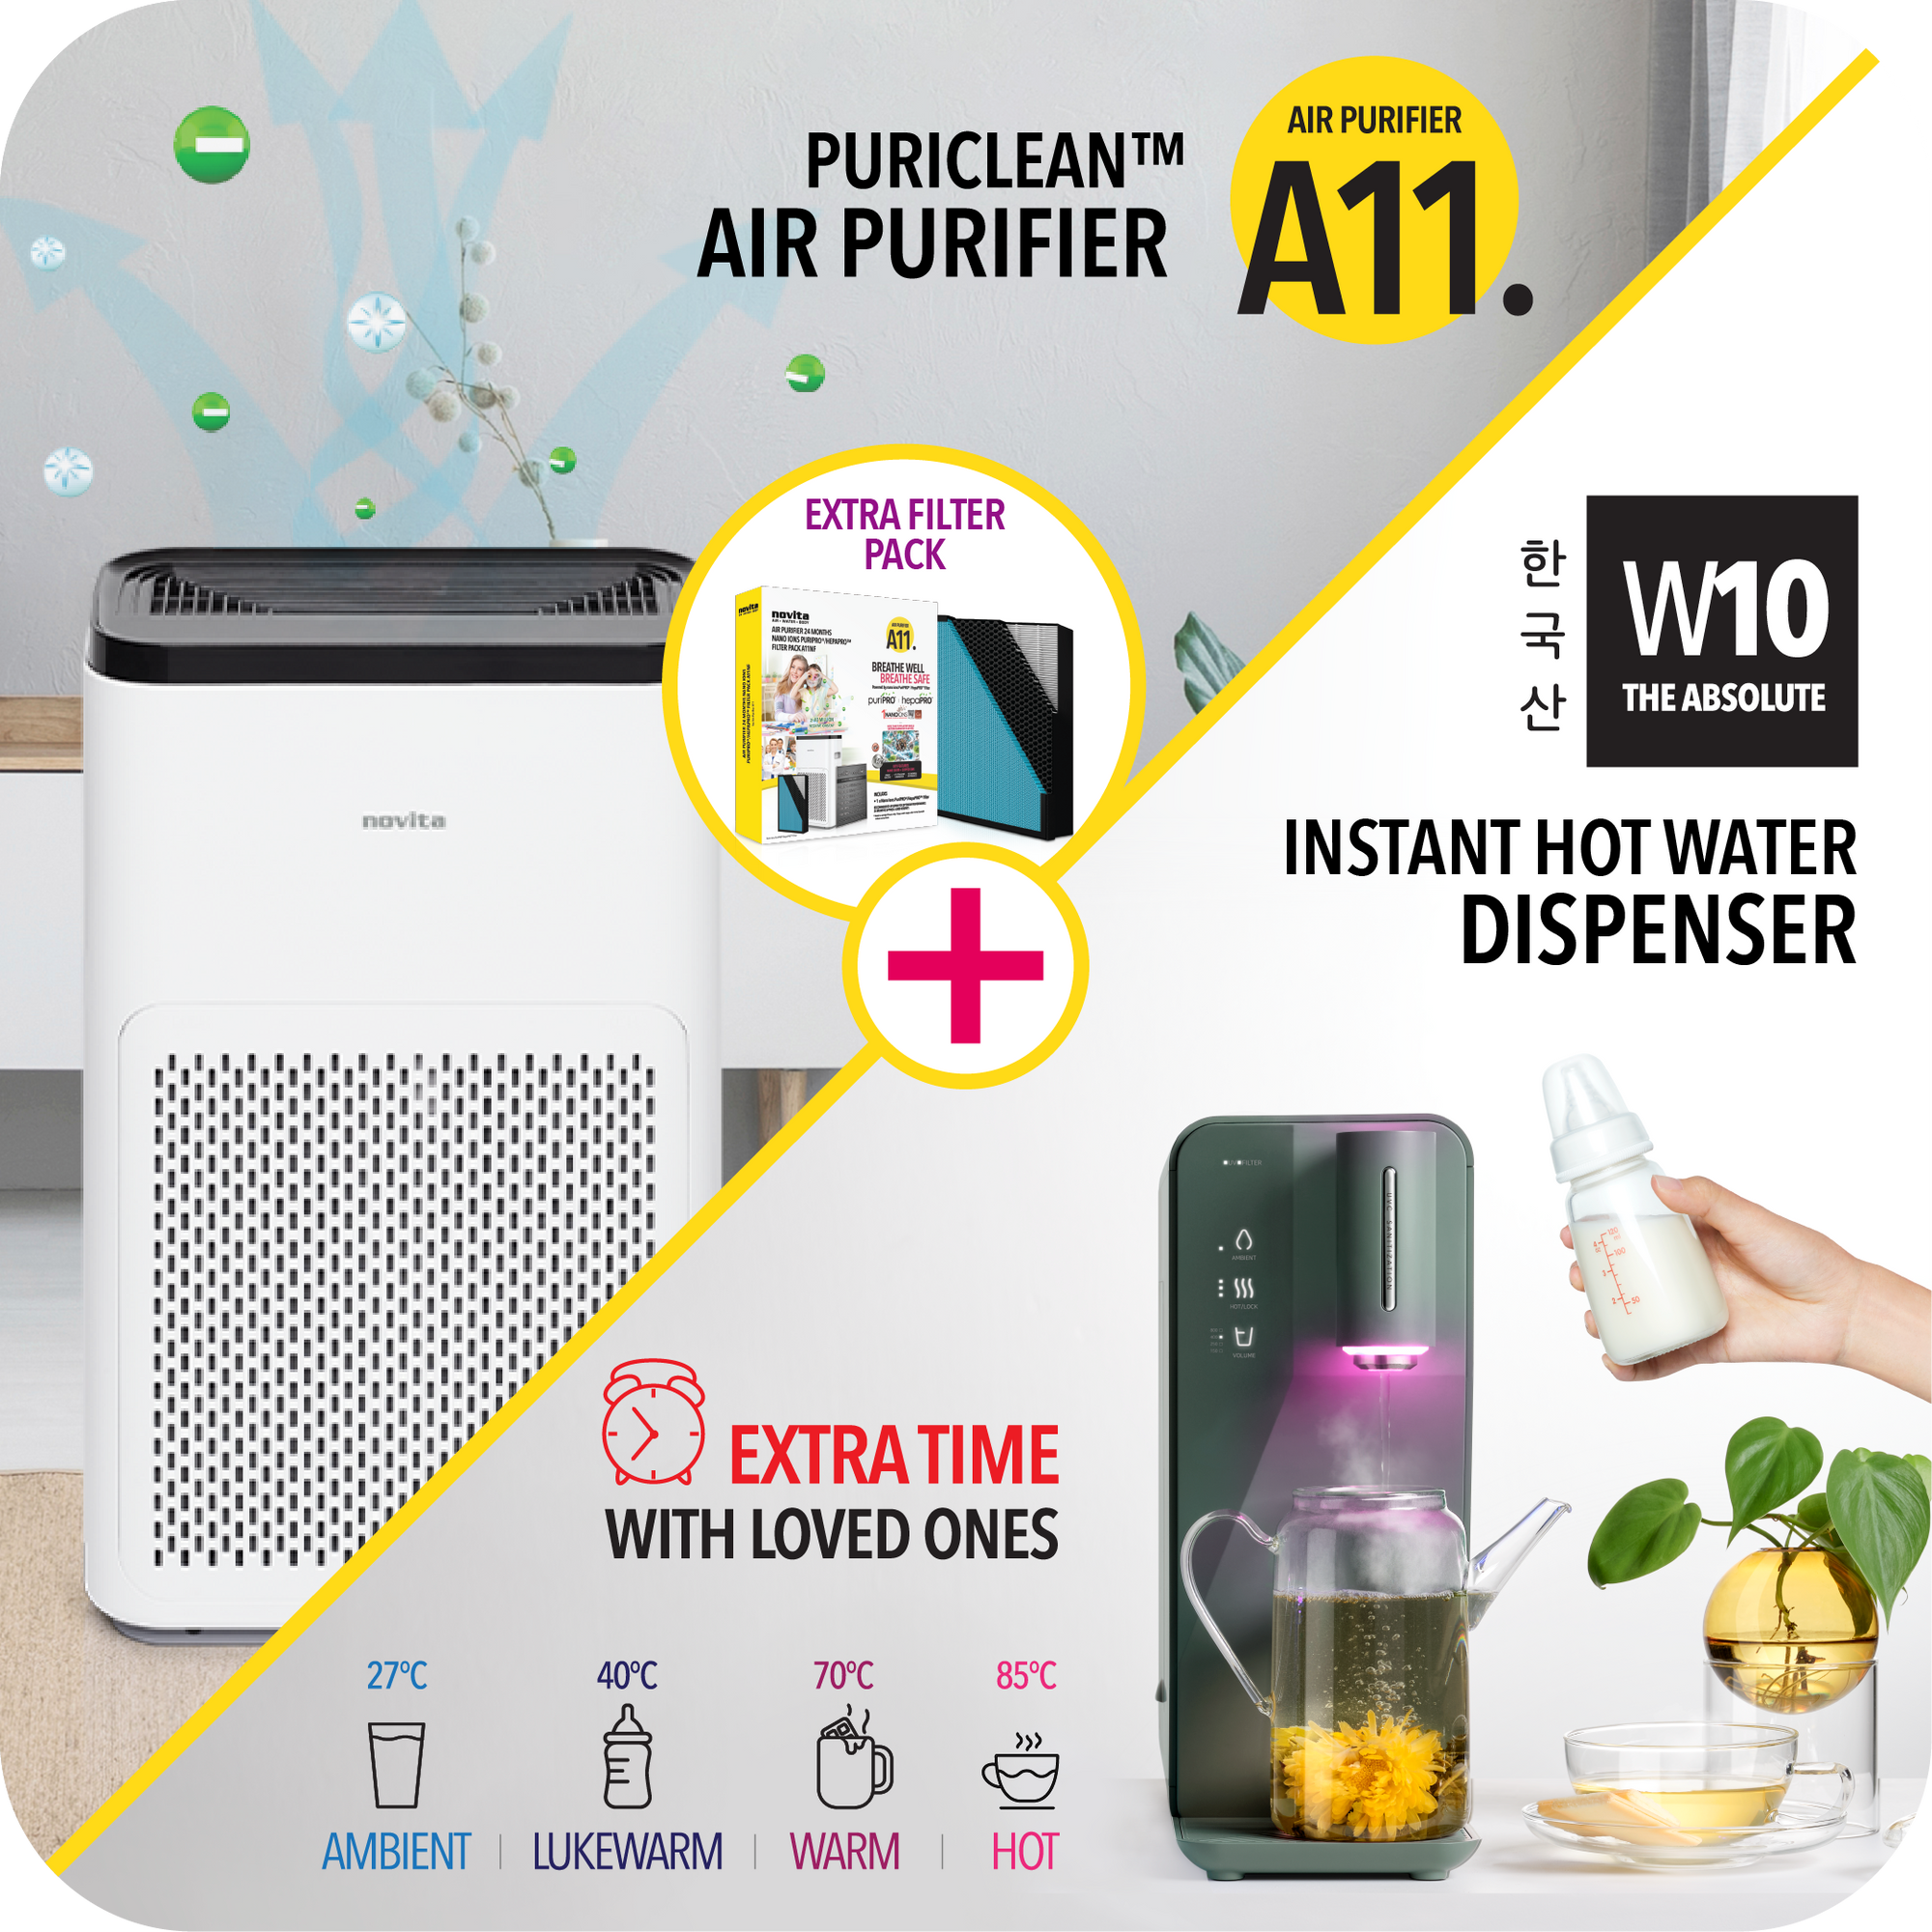 New Homeowners - Bundle Set: Air Purifier A11 with Extra Filter + Instant Hot Water Dispenser W10